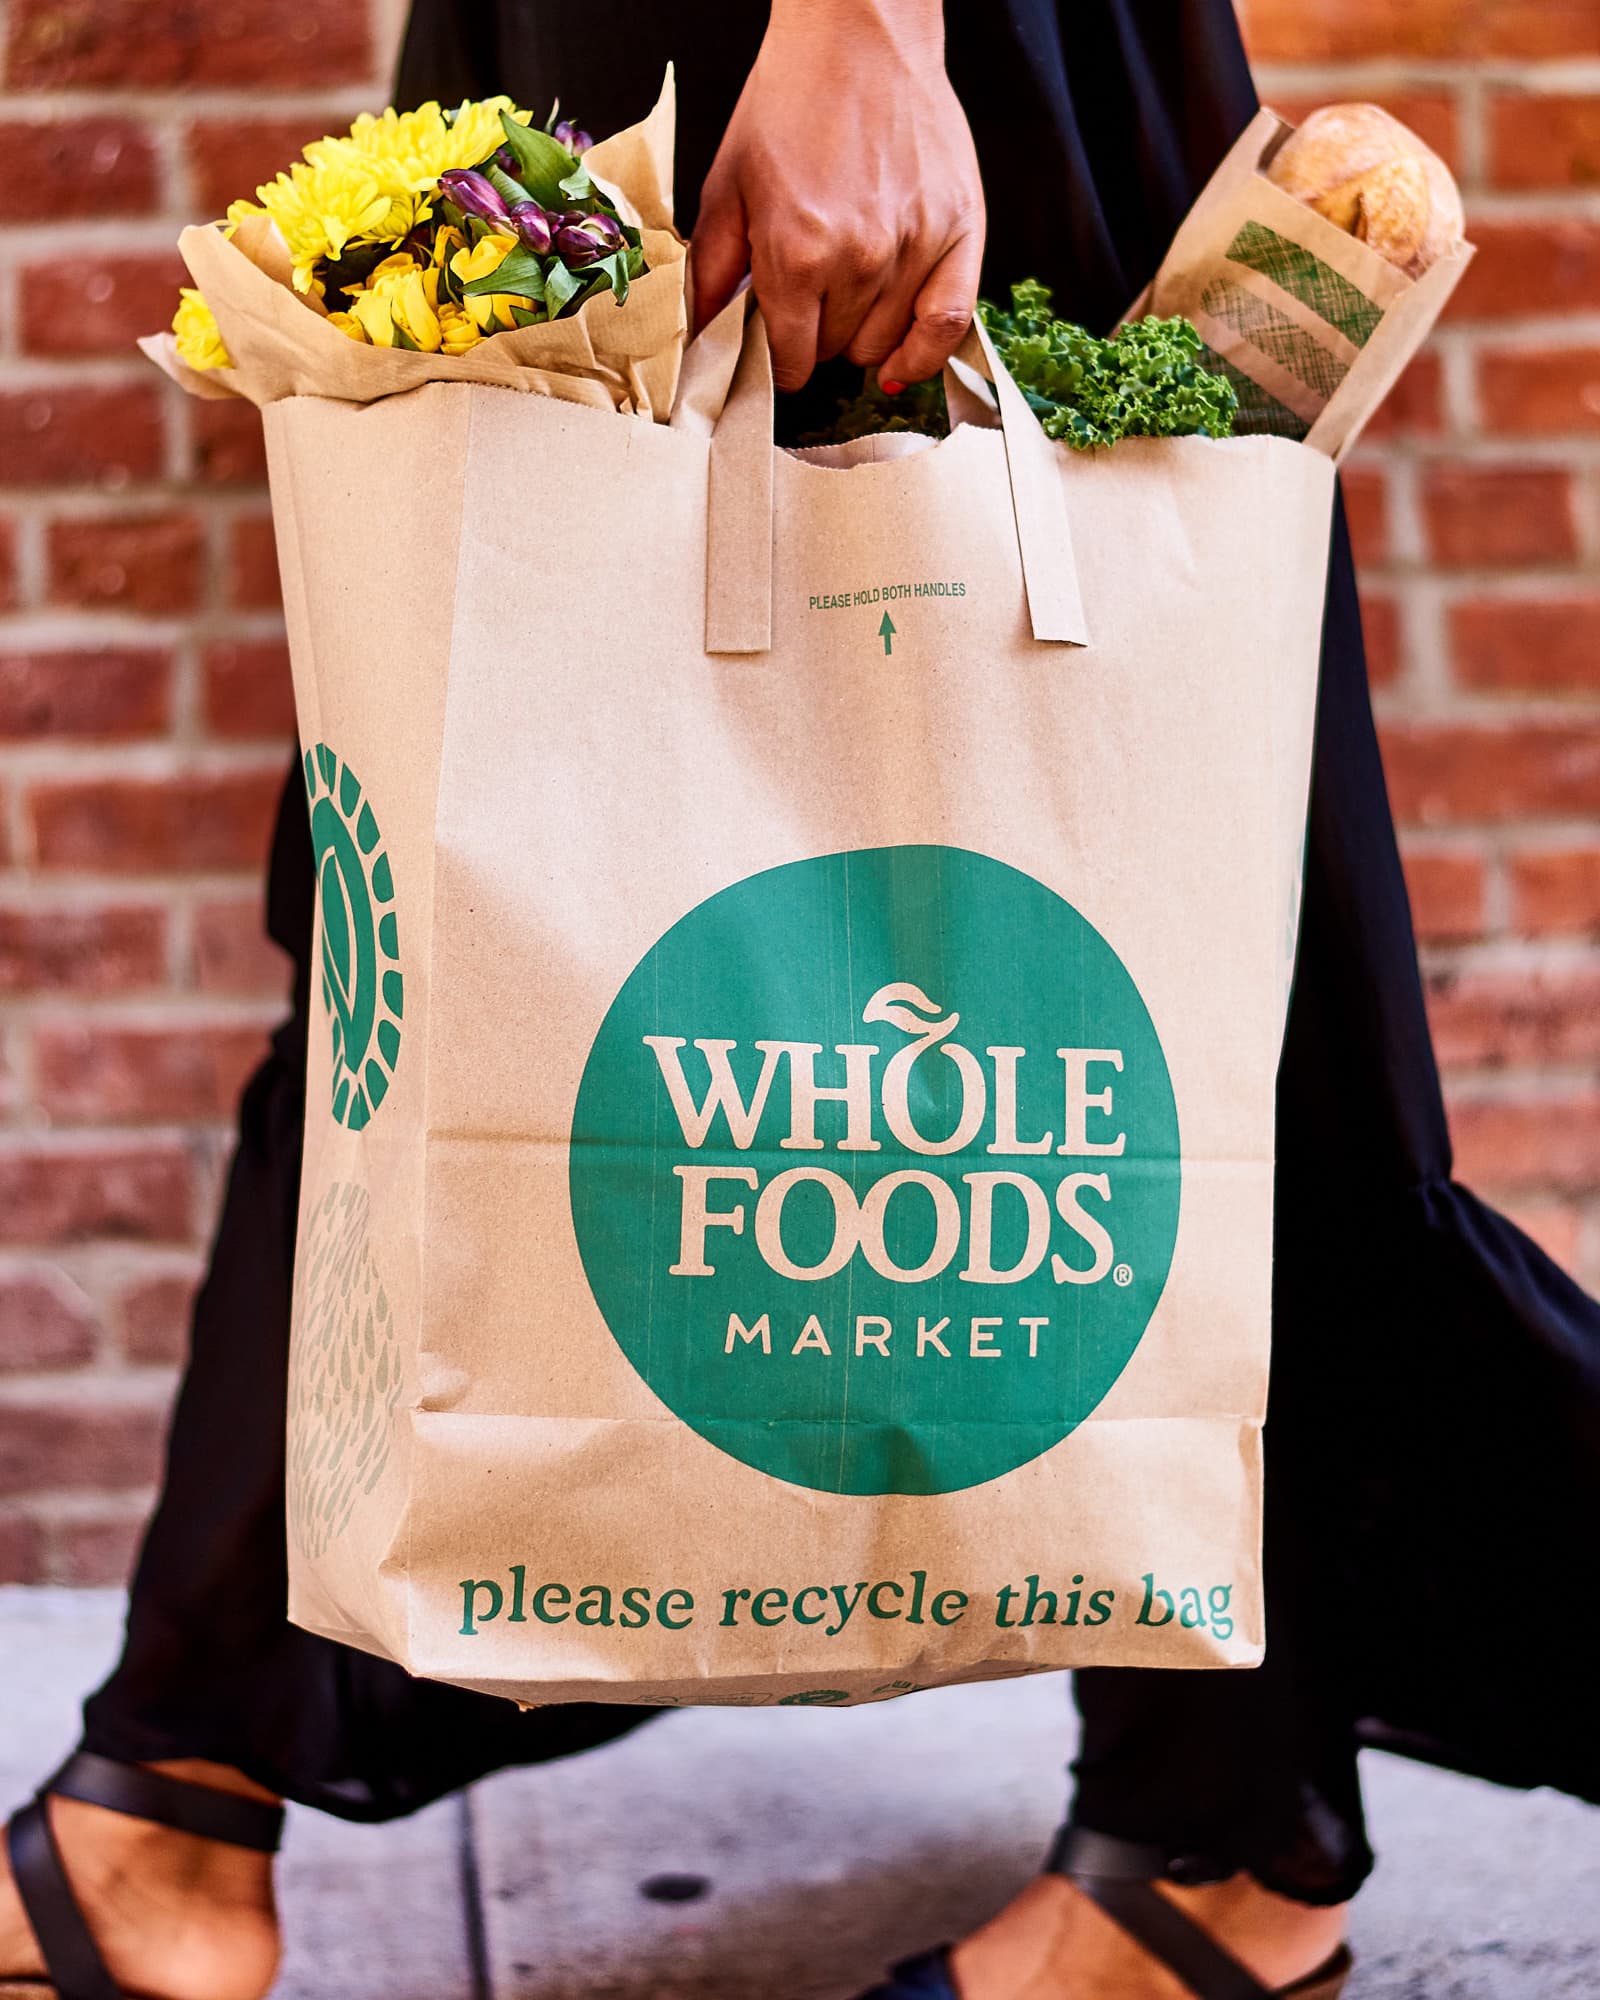 Prime Customers Can Now Order Delivery From Whole Foods - Eater